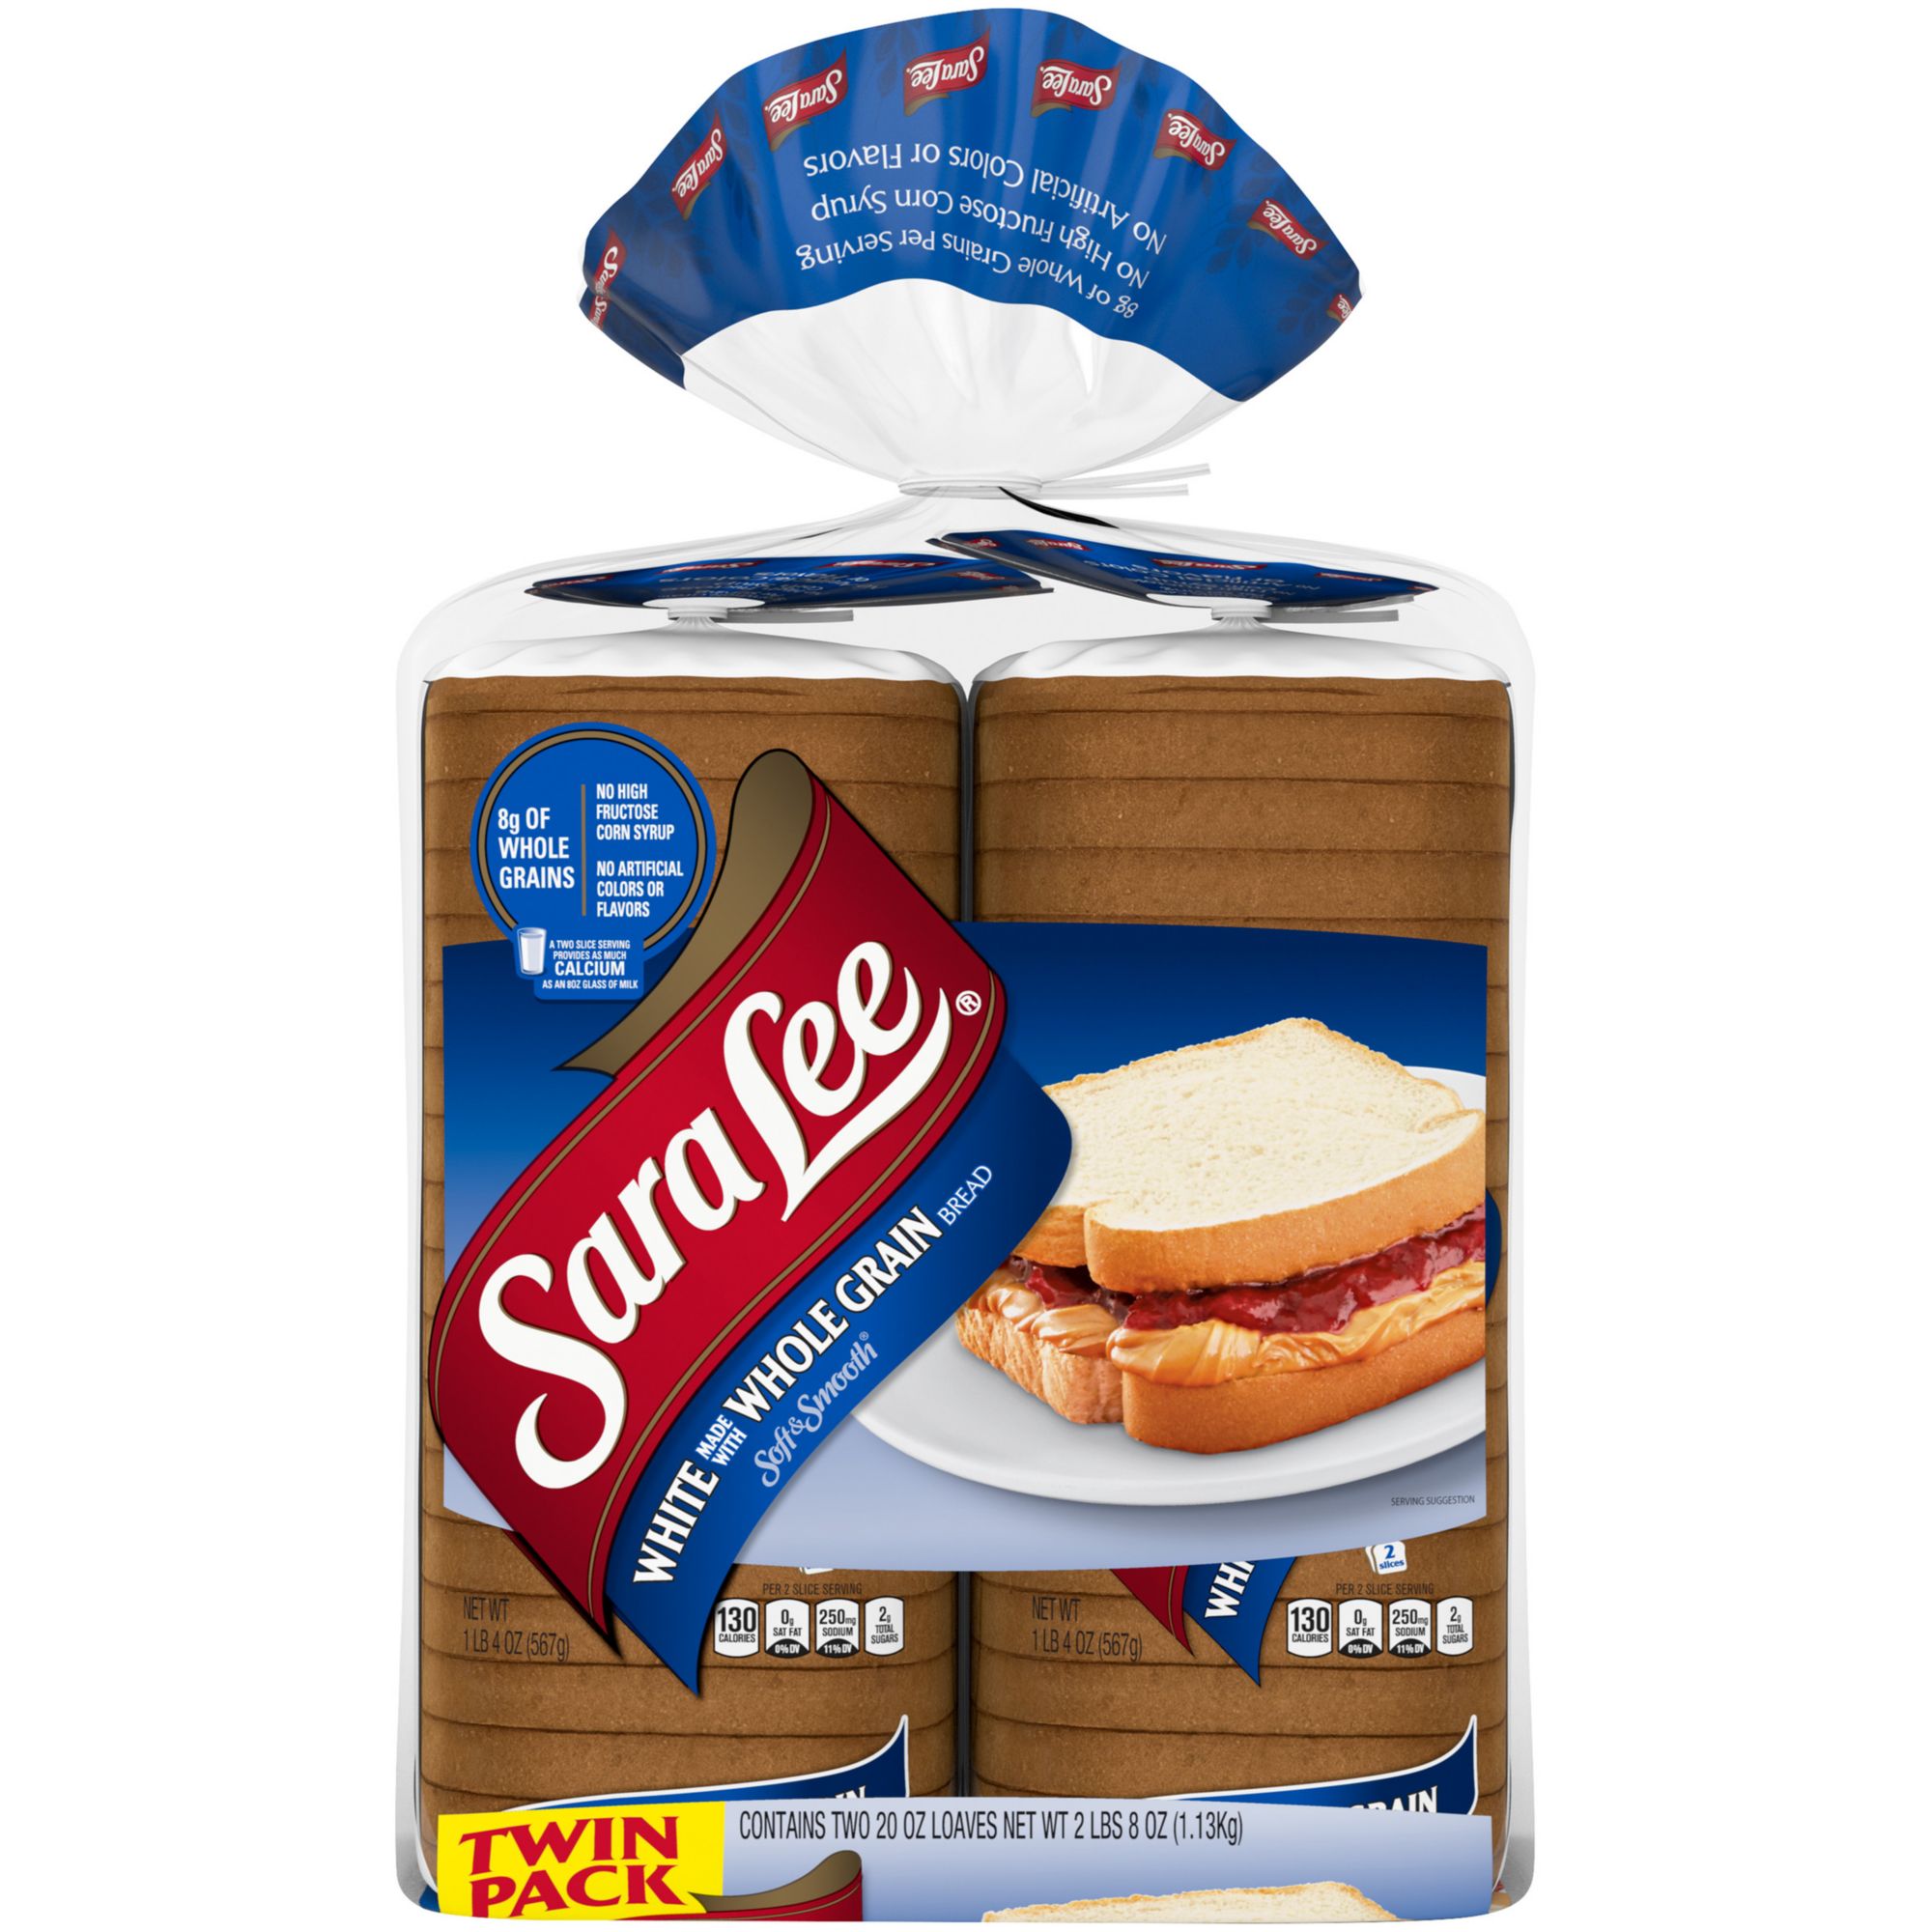 Sara Lee White made with Whole Grain Sandwich Bread, 20 oz - Pay Less Super  Markets